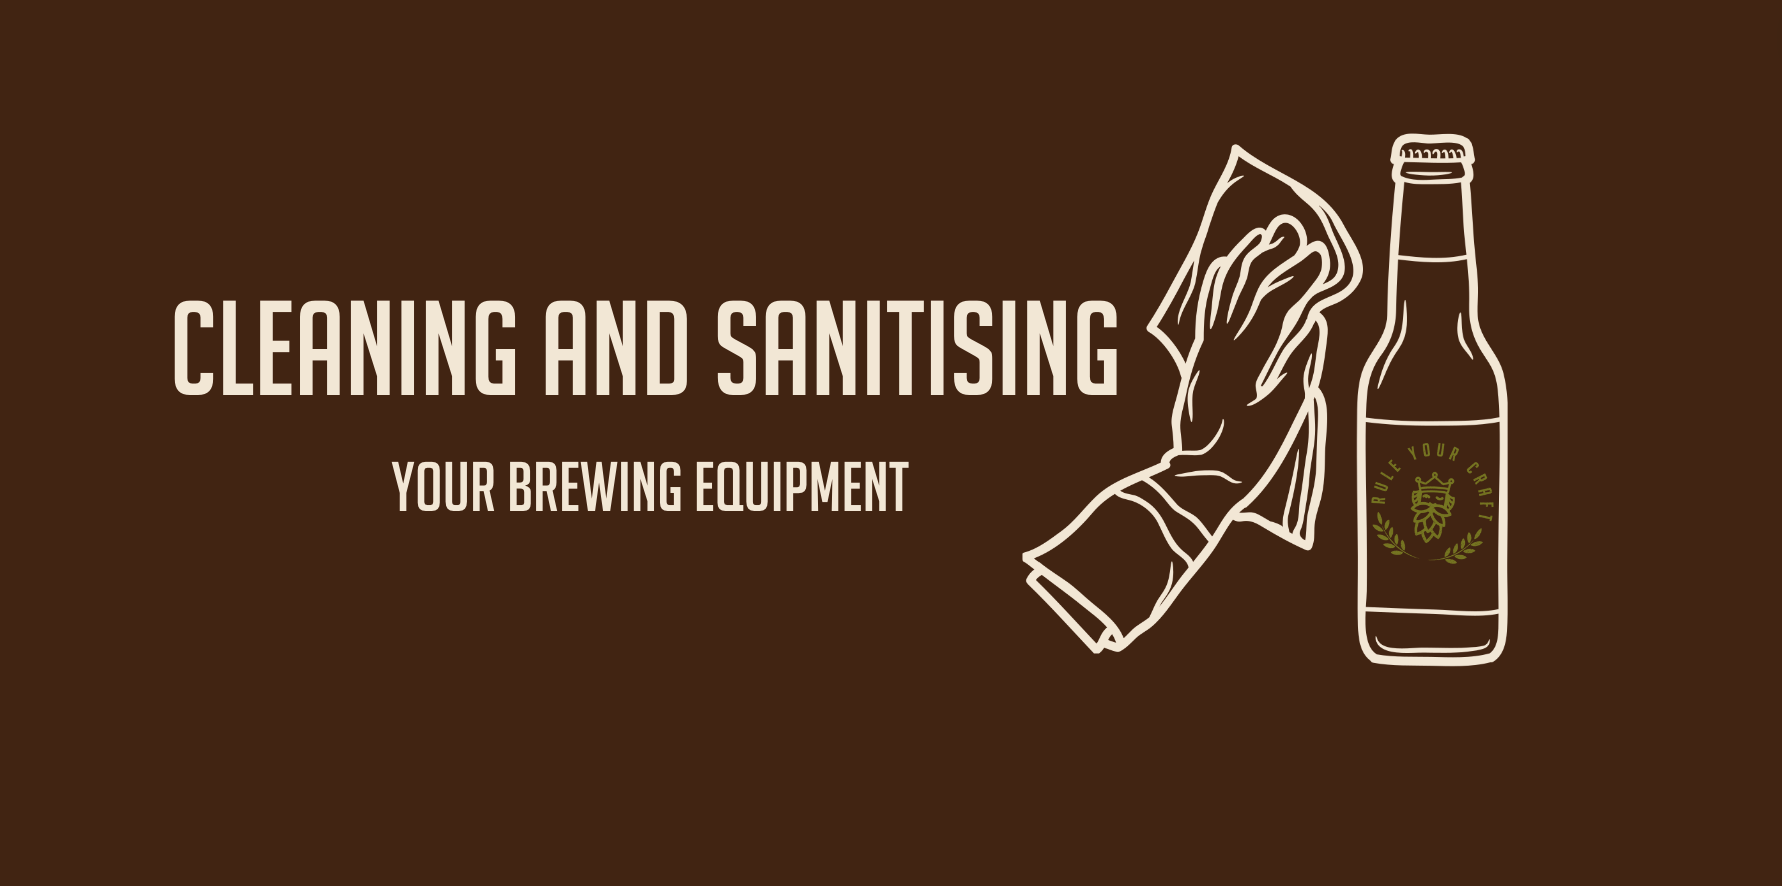 Cleaning and sanitising your home brew equipment, Noble Barons blog post image